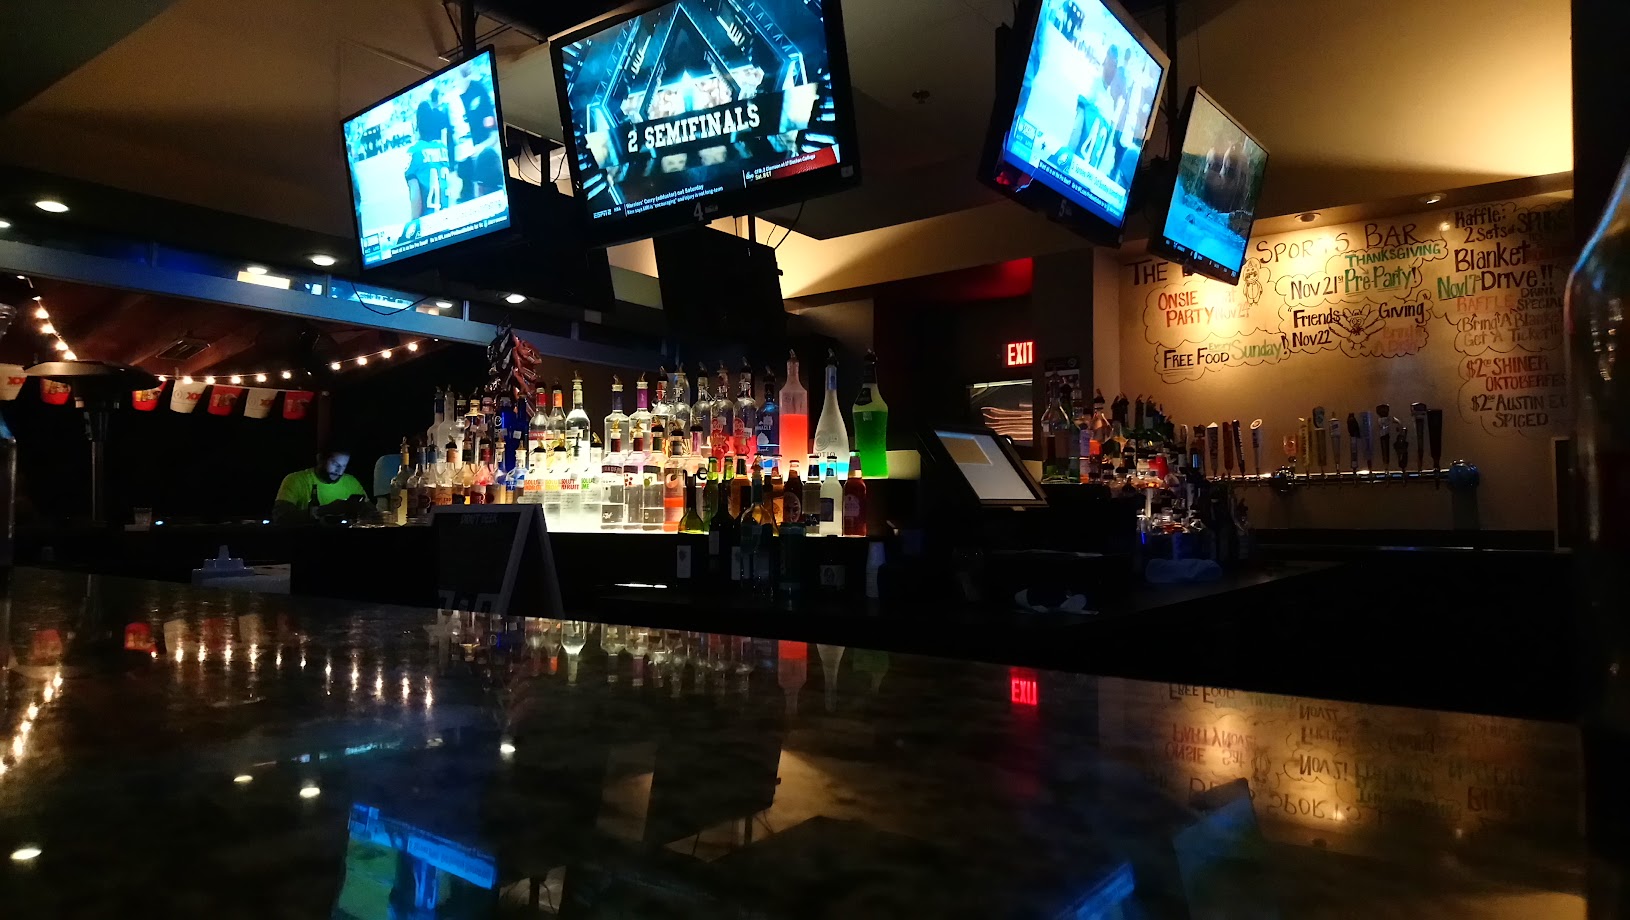 The Bend Sports Bar